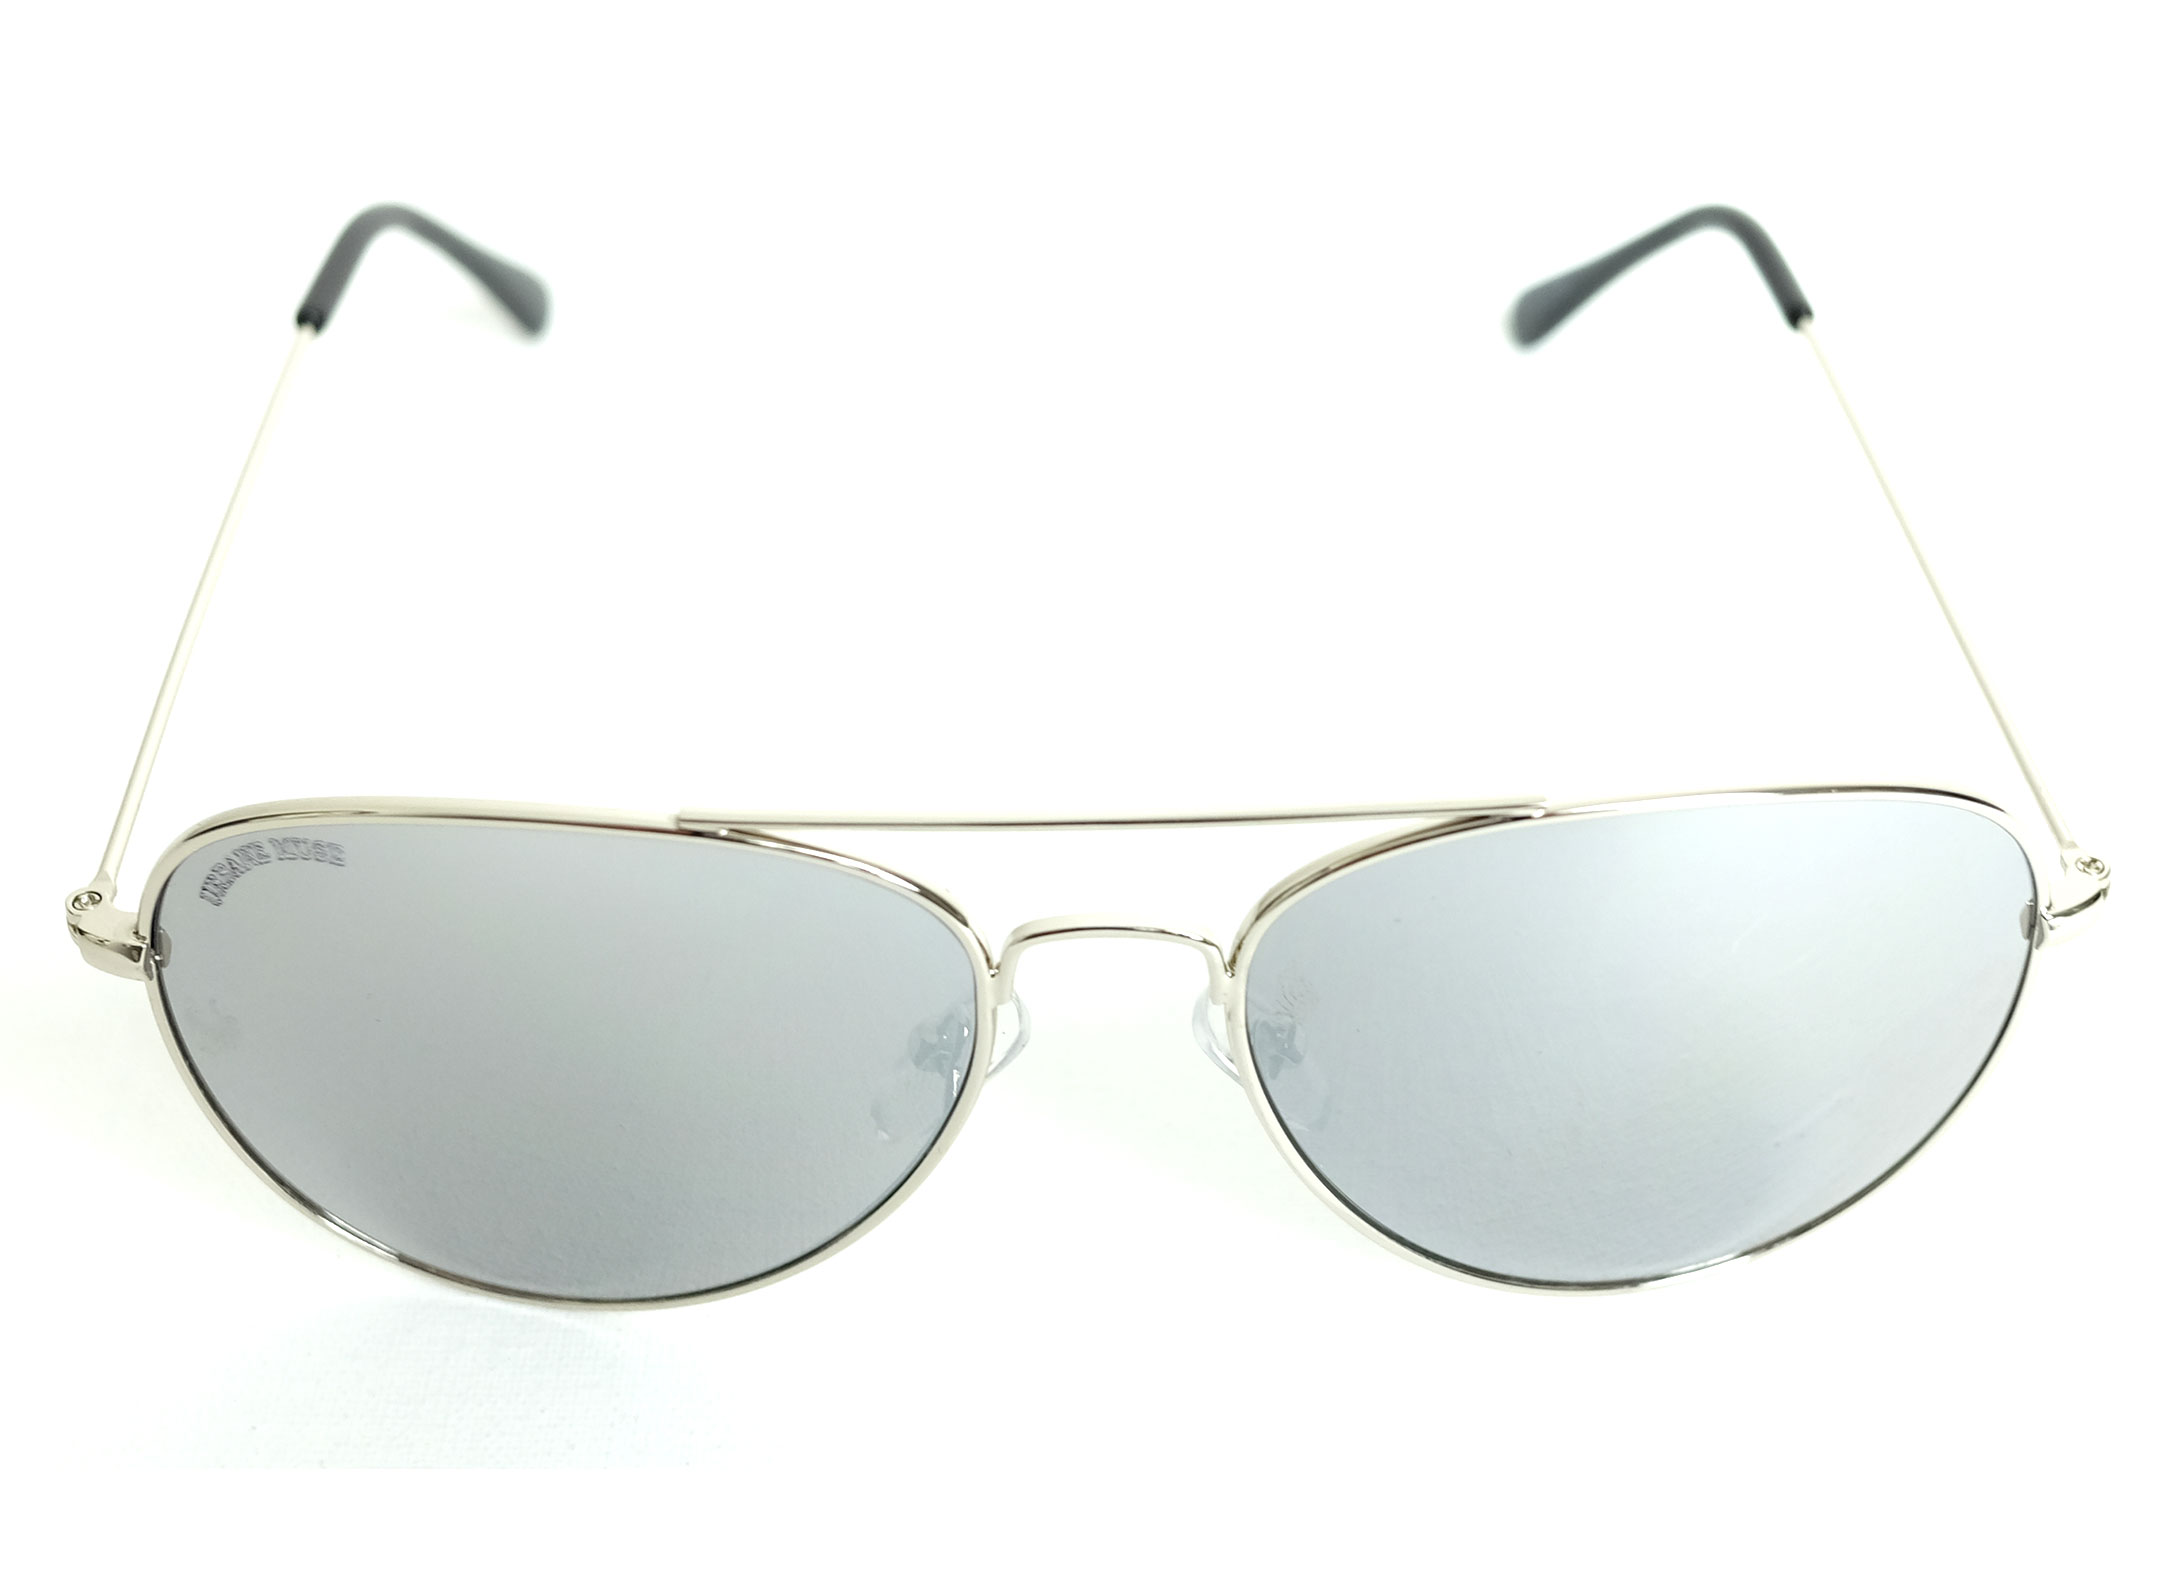 Silver Metal Frame Aviator Sunglasses with Silver Mirror lens